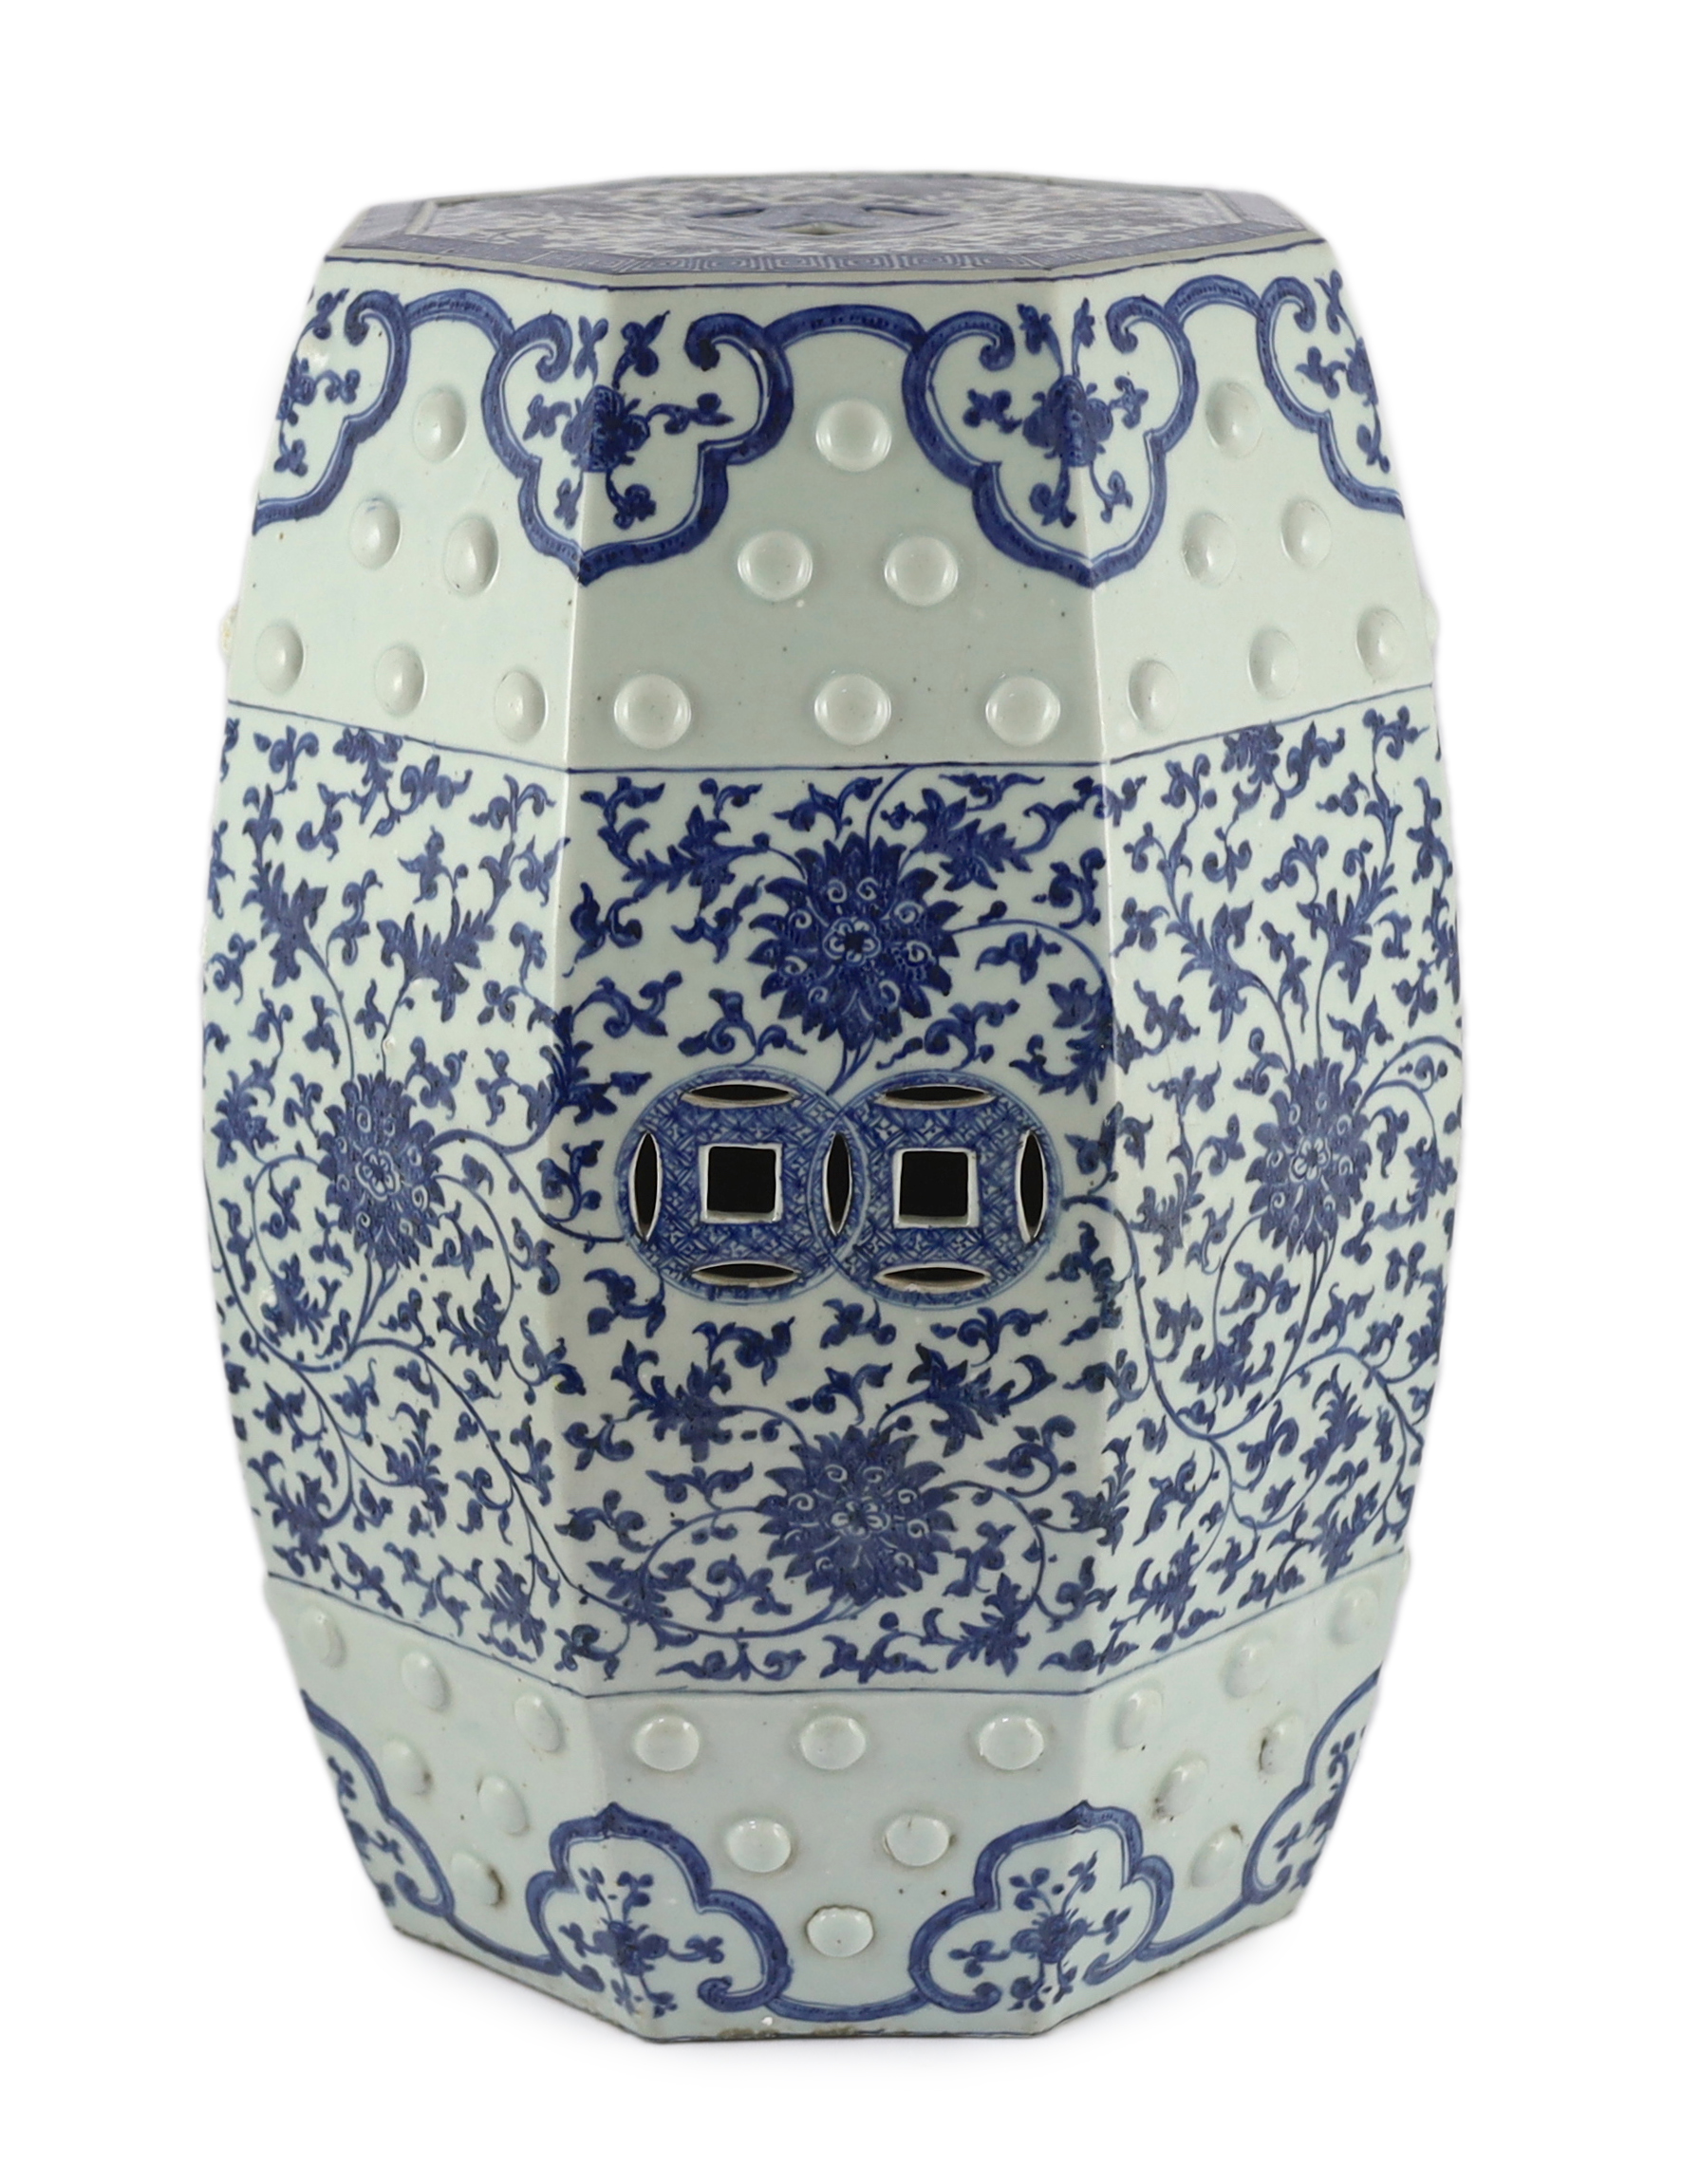 A Chinese blue and white octagonal garden seat, 18th/19th century                                                                                                                                                           